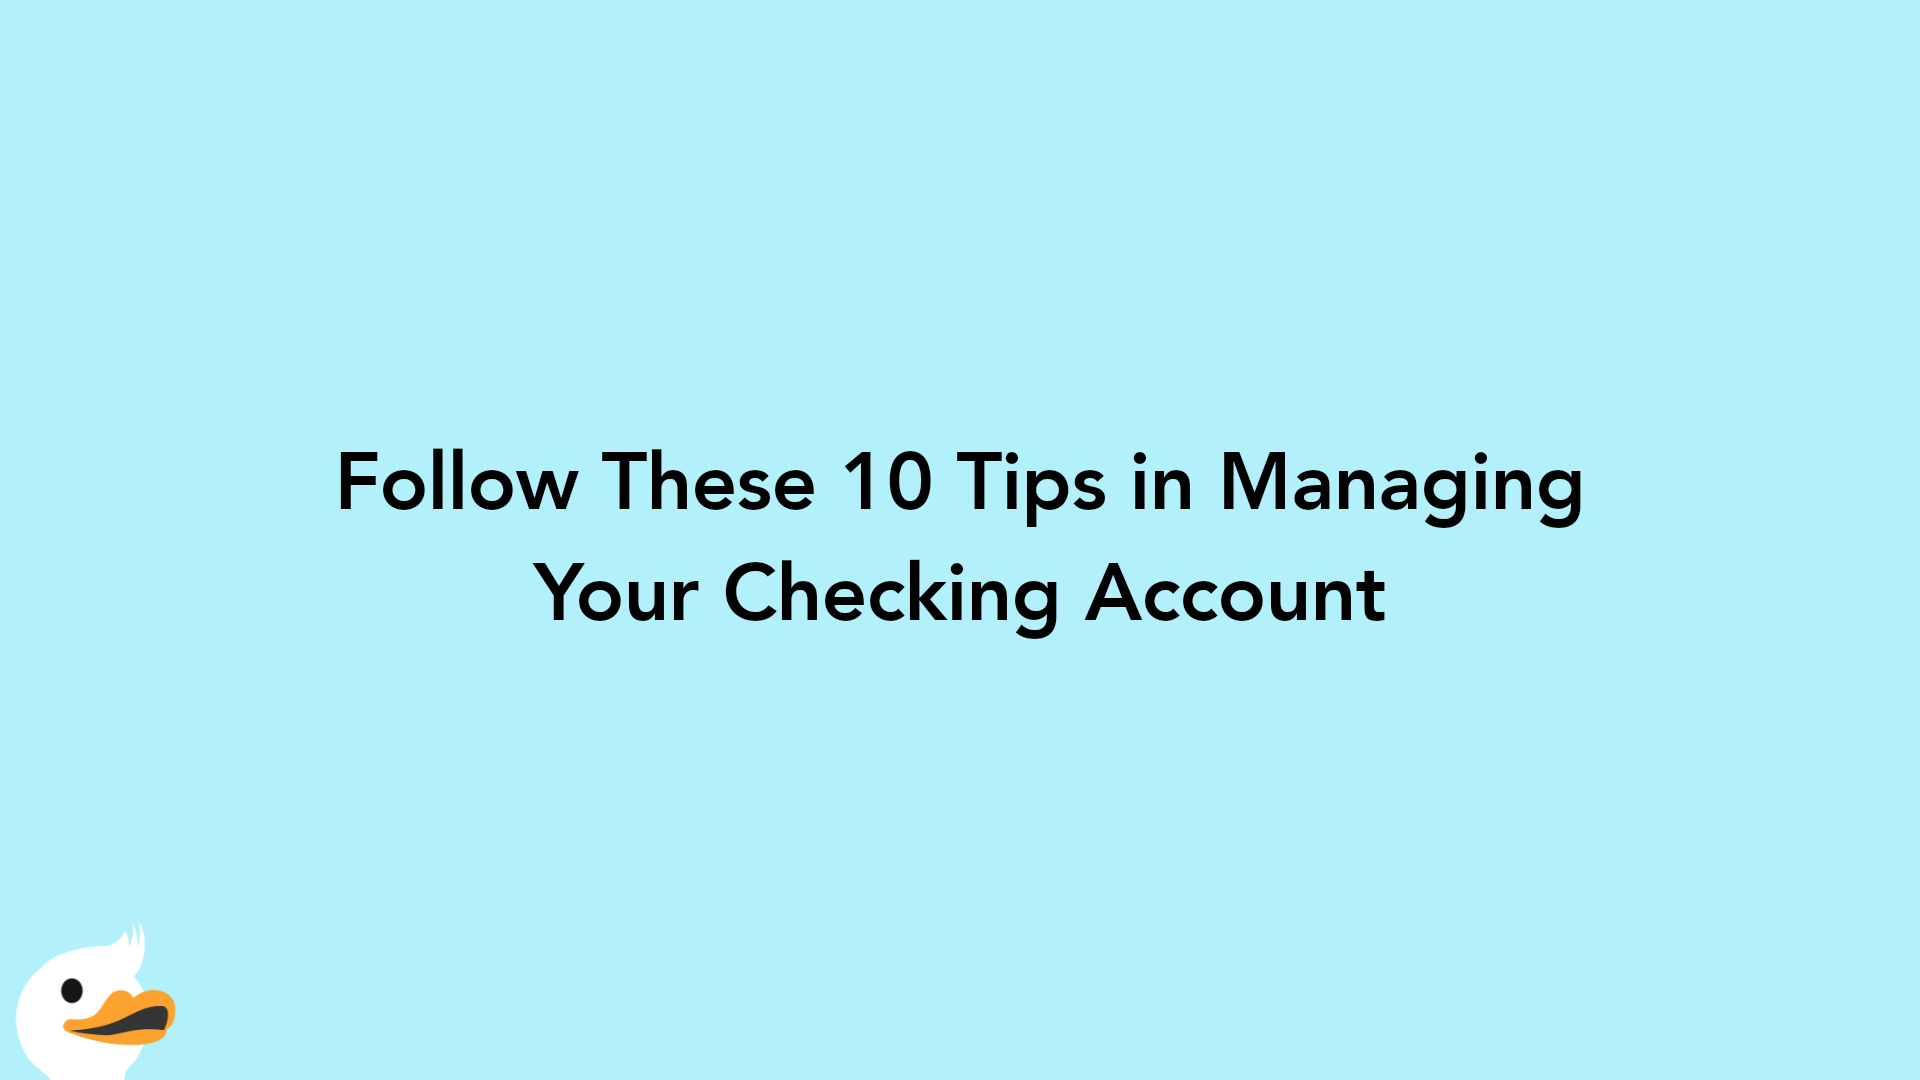 Follow These 10 Tips in Managing Your Checking Account